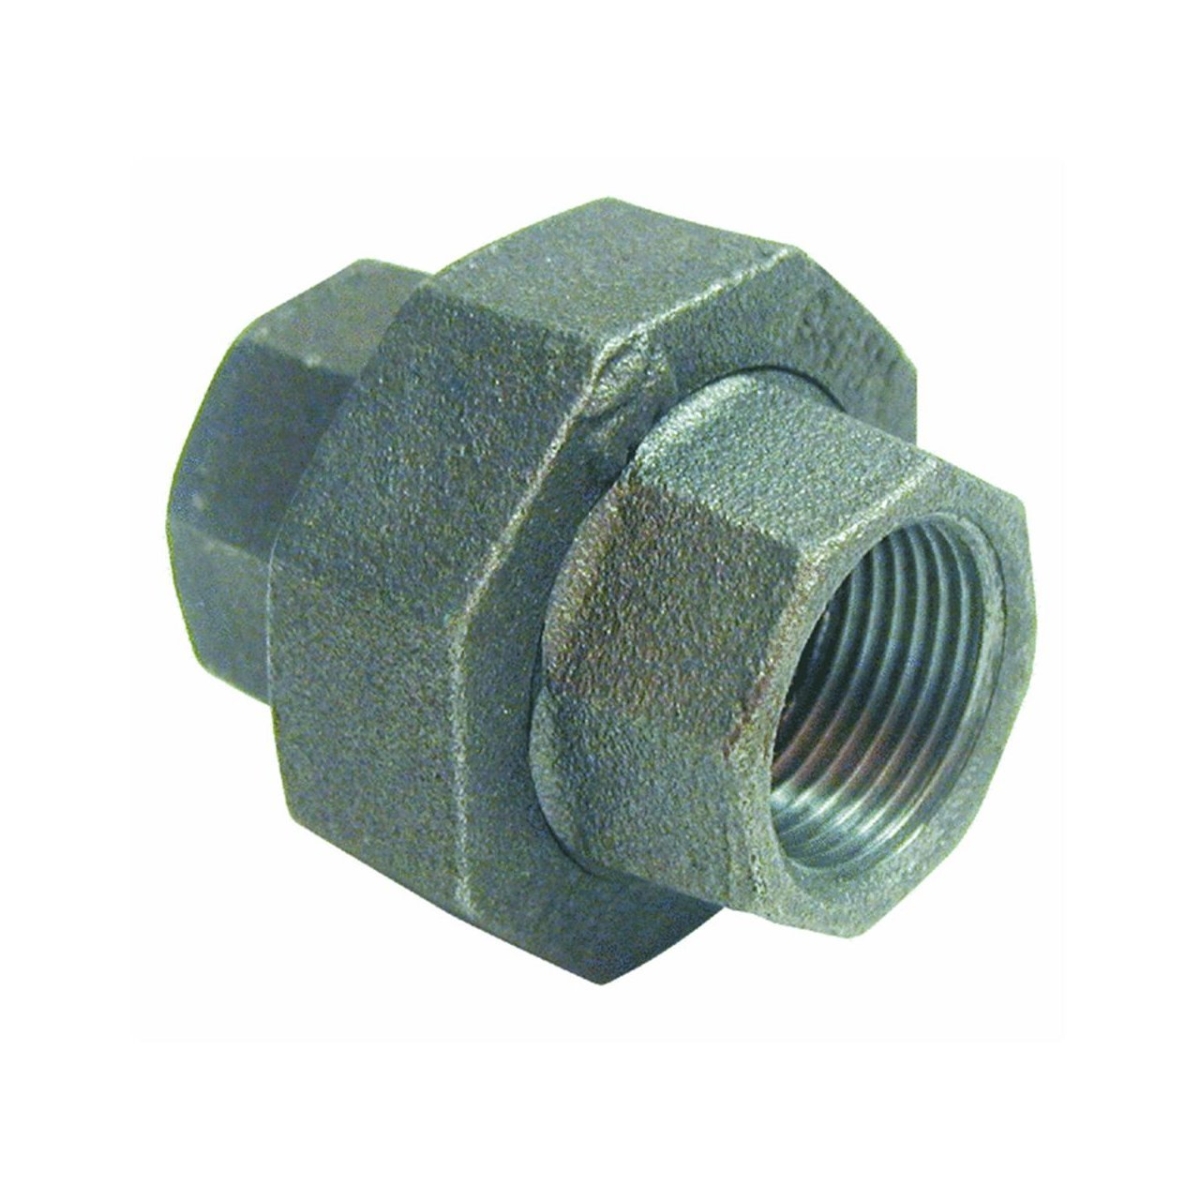 521-705hn 1 In. Ground Joint Union, Black